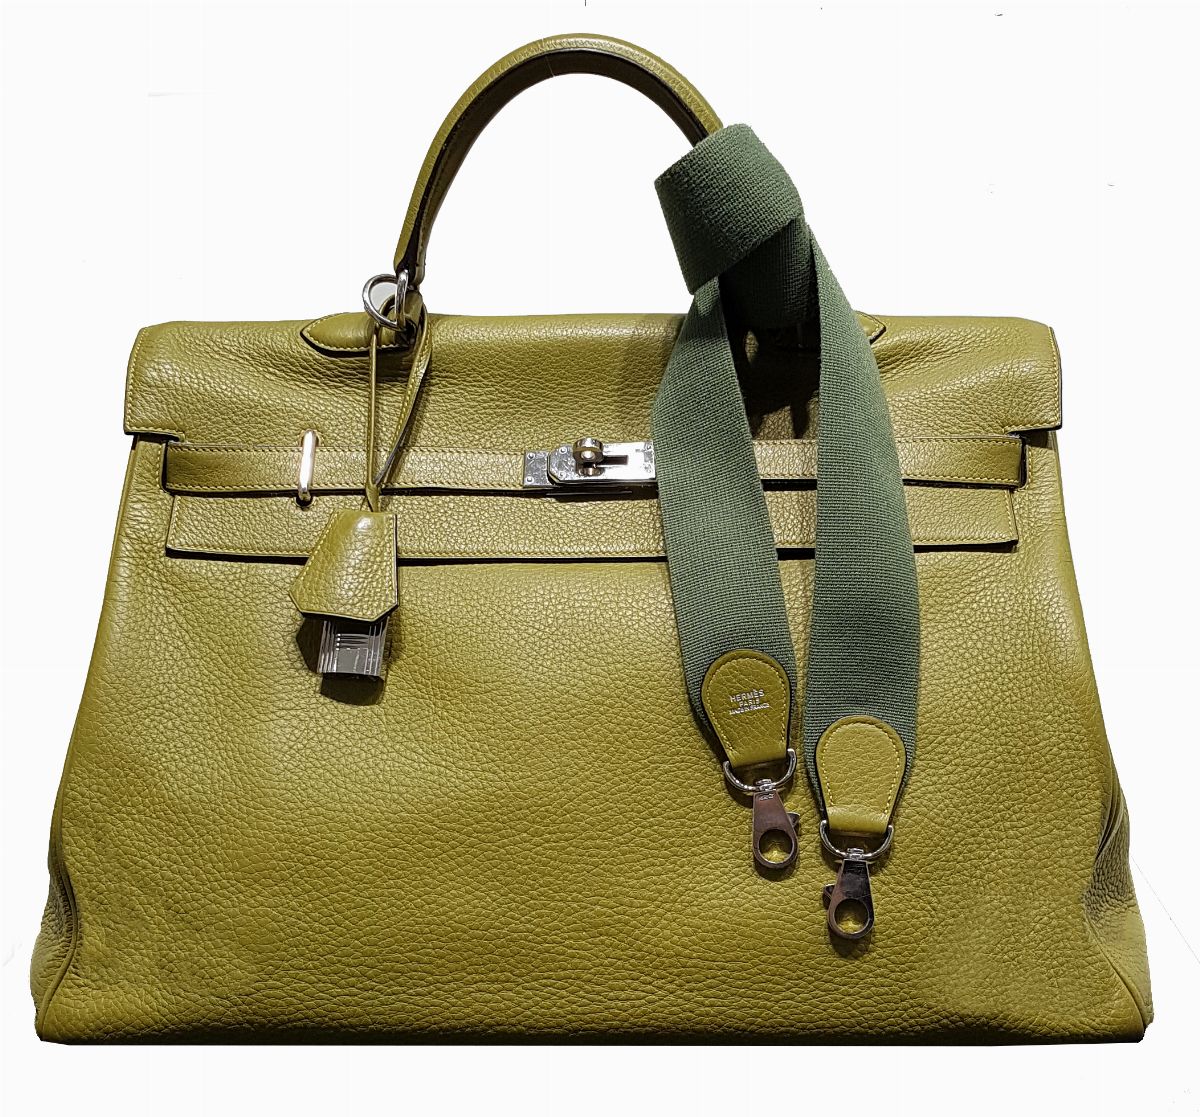 Sold at Auction: Hermes Vert Anis Togo Kelly 32